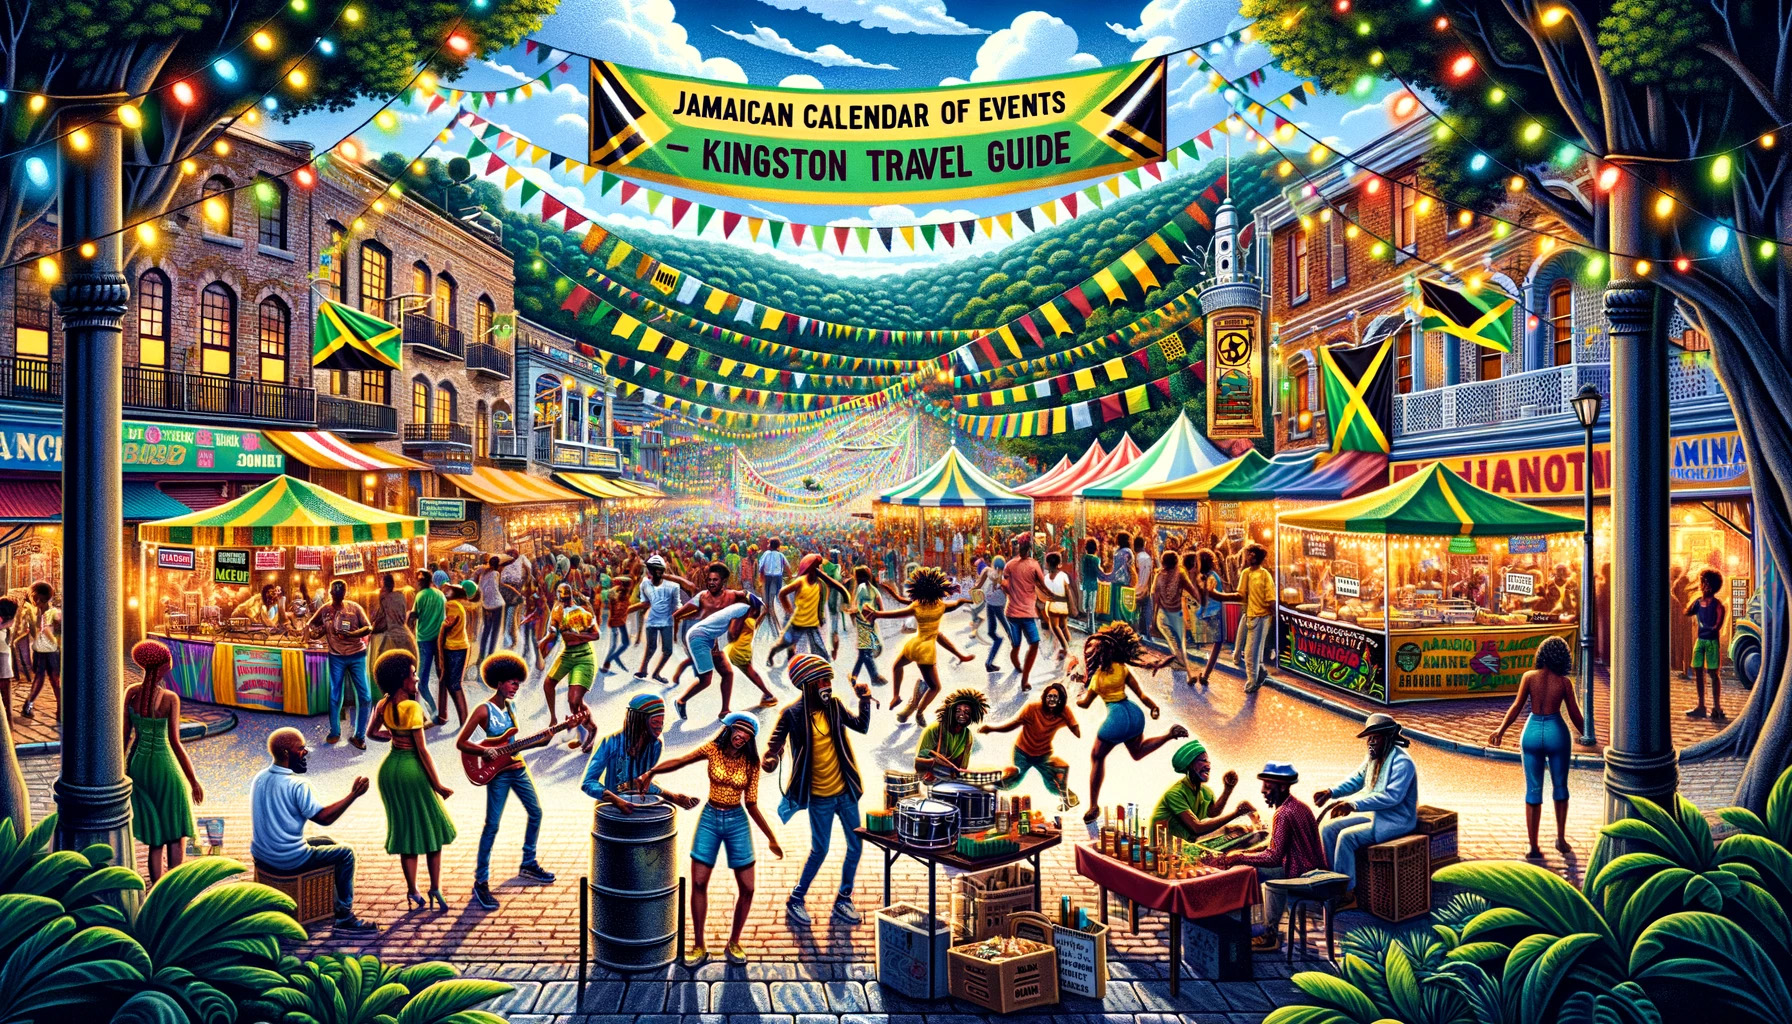 Jamaican Calendar Of Events - Kingston Travel Guide